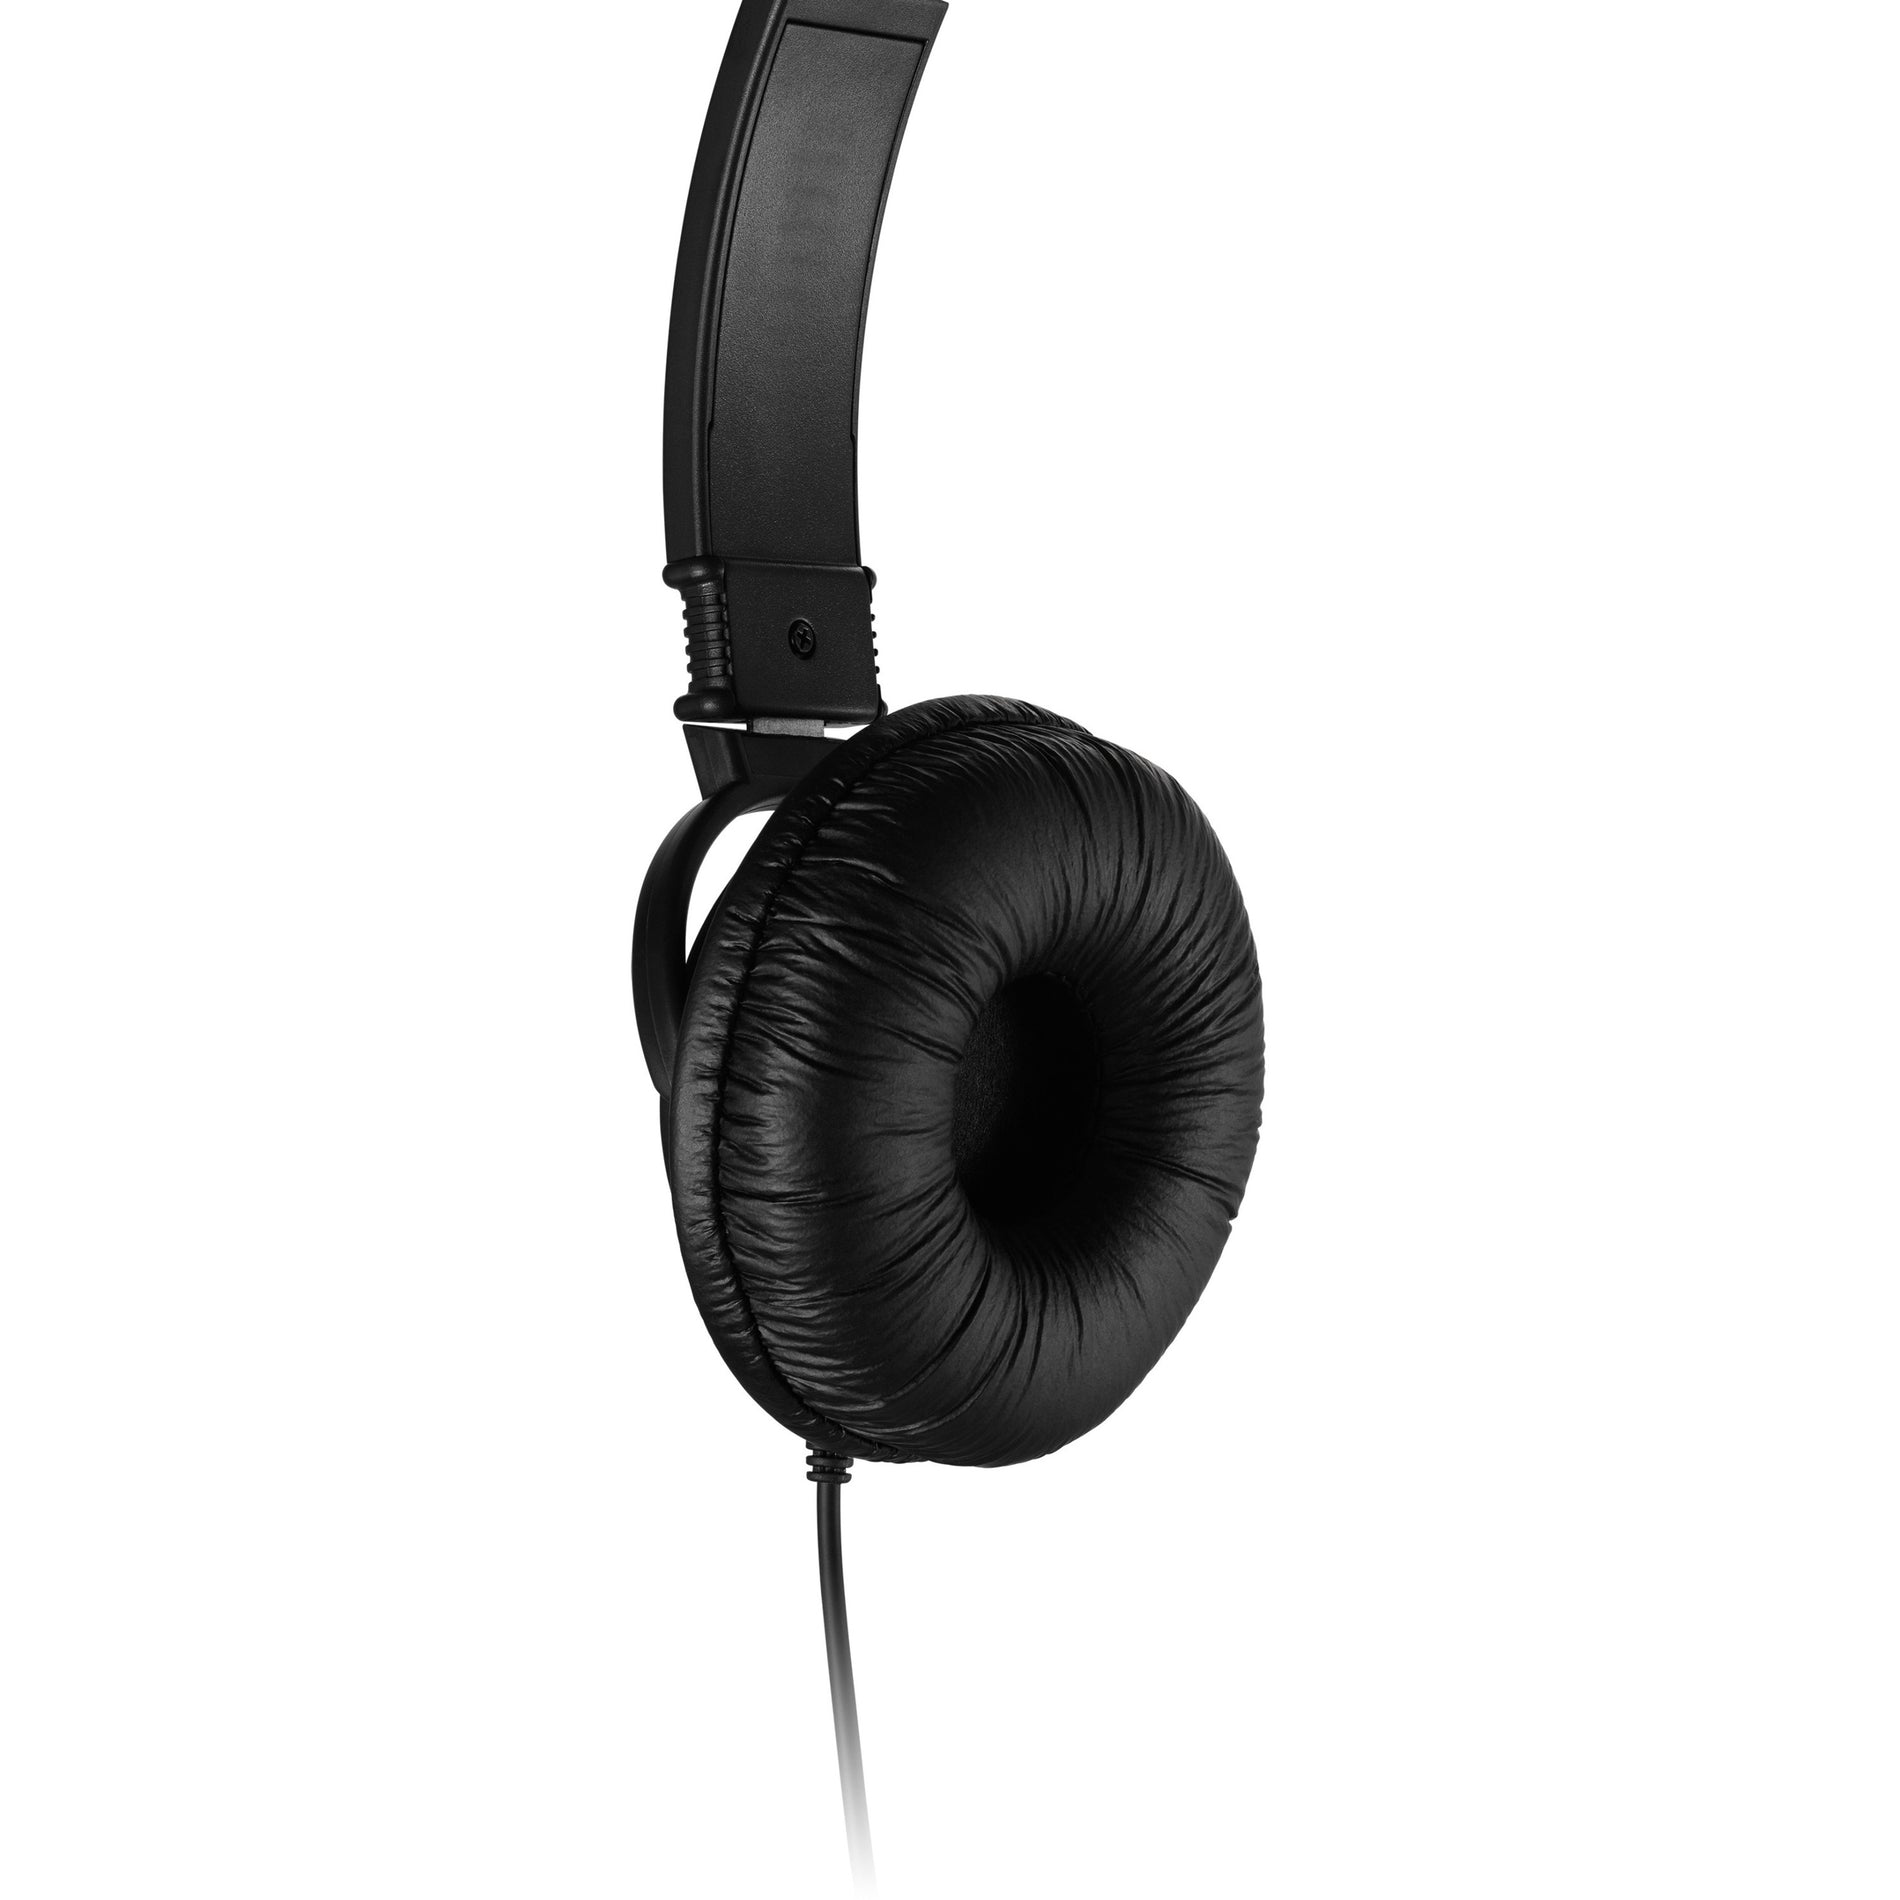 Kensington K33597WW Classic Headset with Mic and Volume Control, Over-the-head, Noise Cancelling, Black